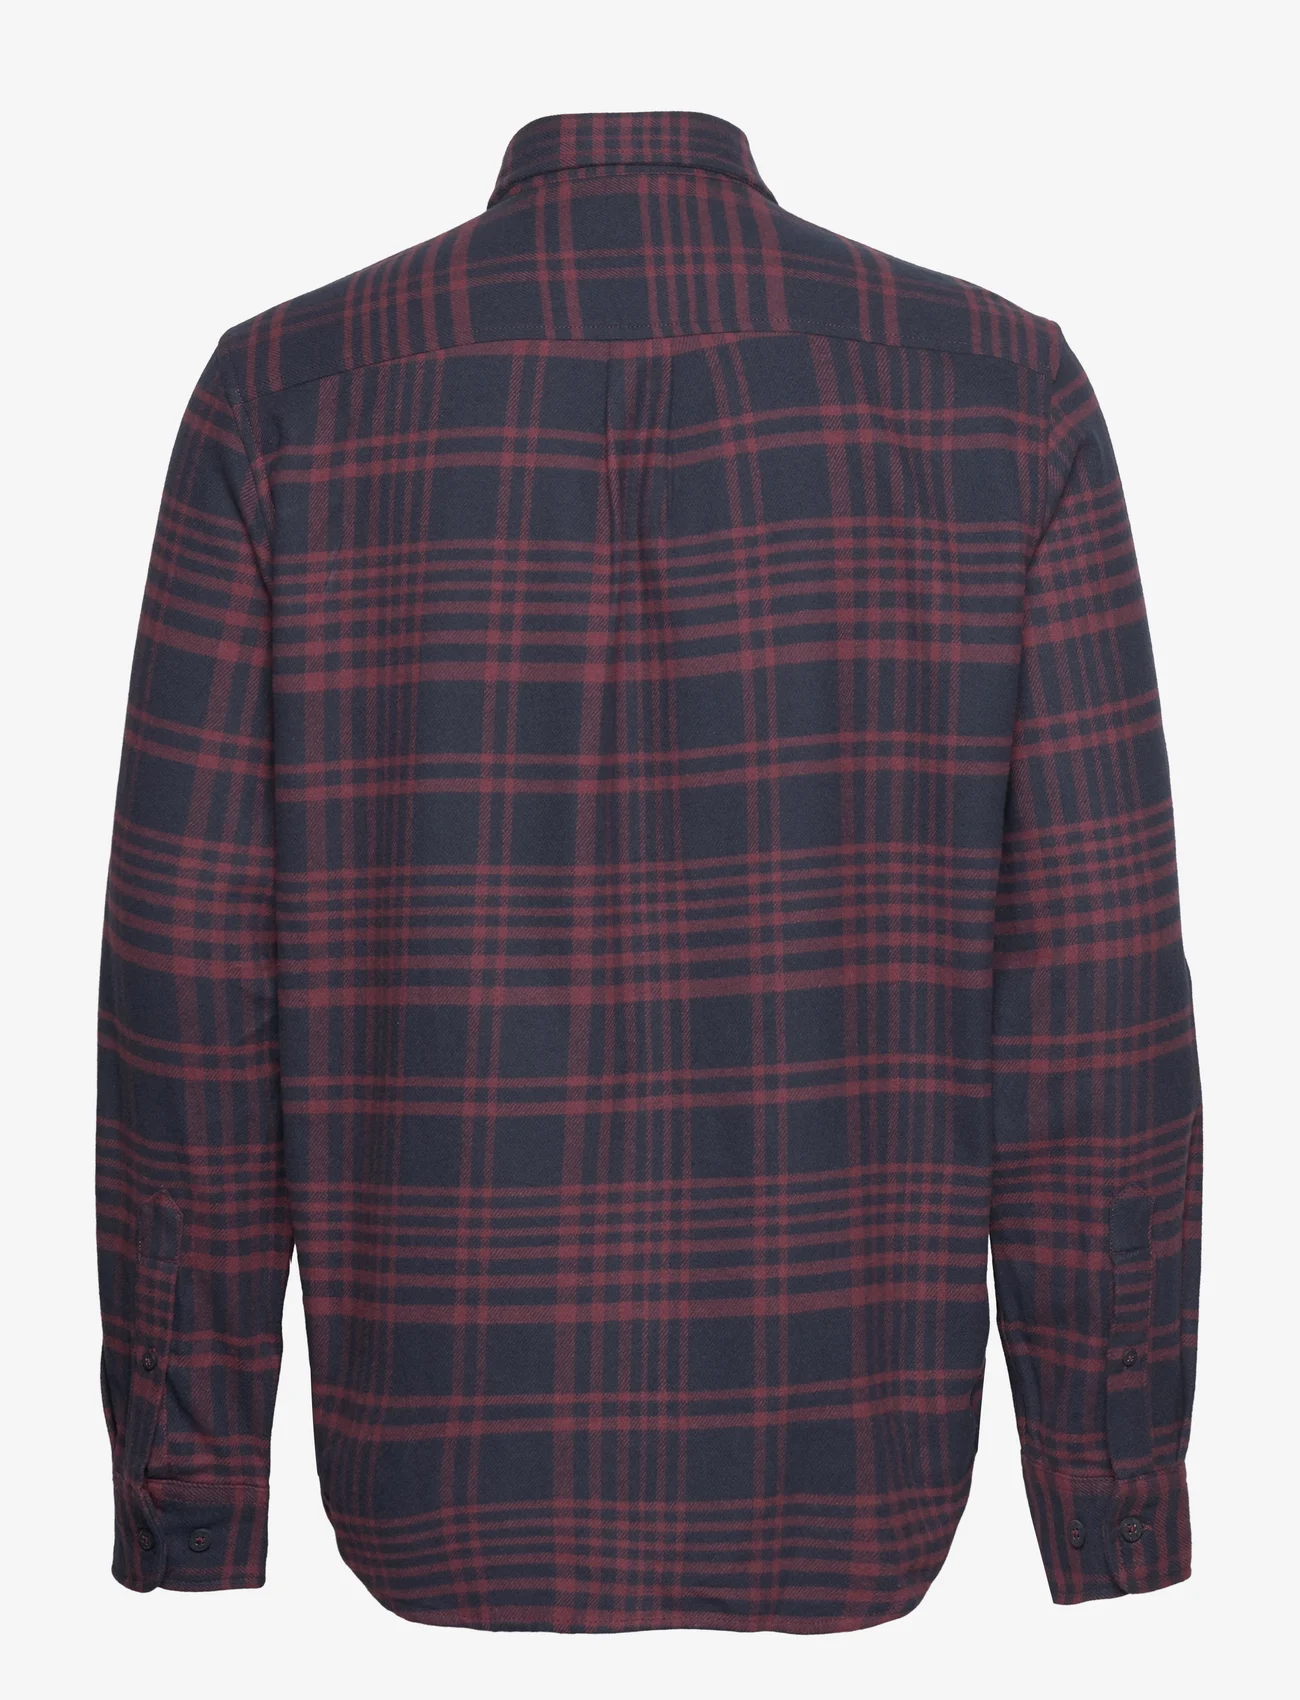 Timberland - LS Heavy Flannel Check - checkered shirts - port royale yd - 1